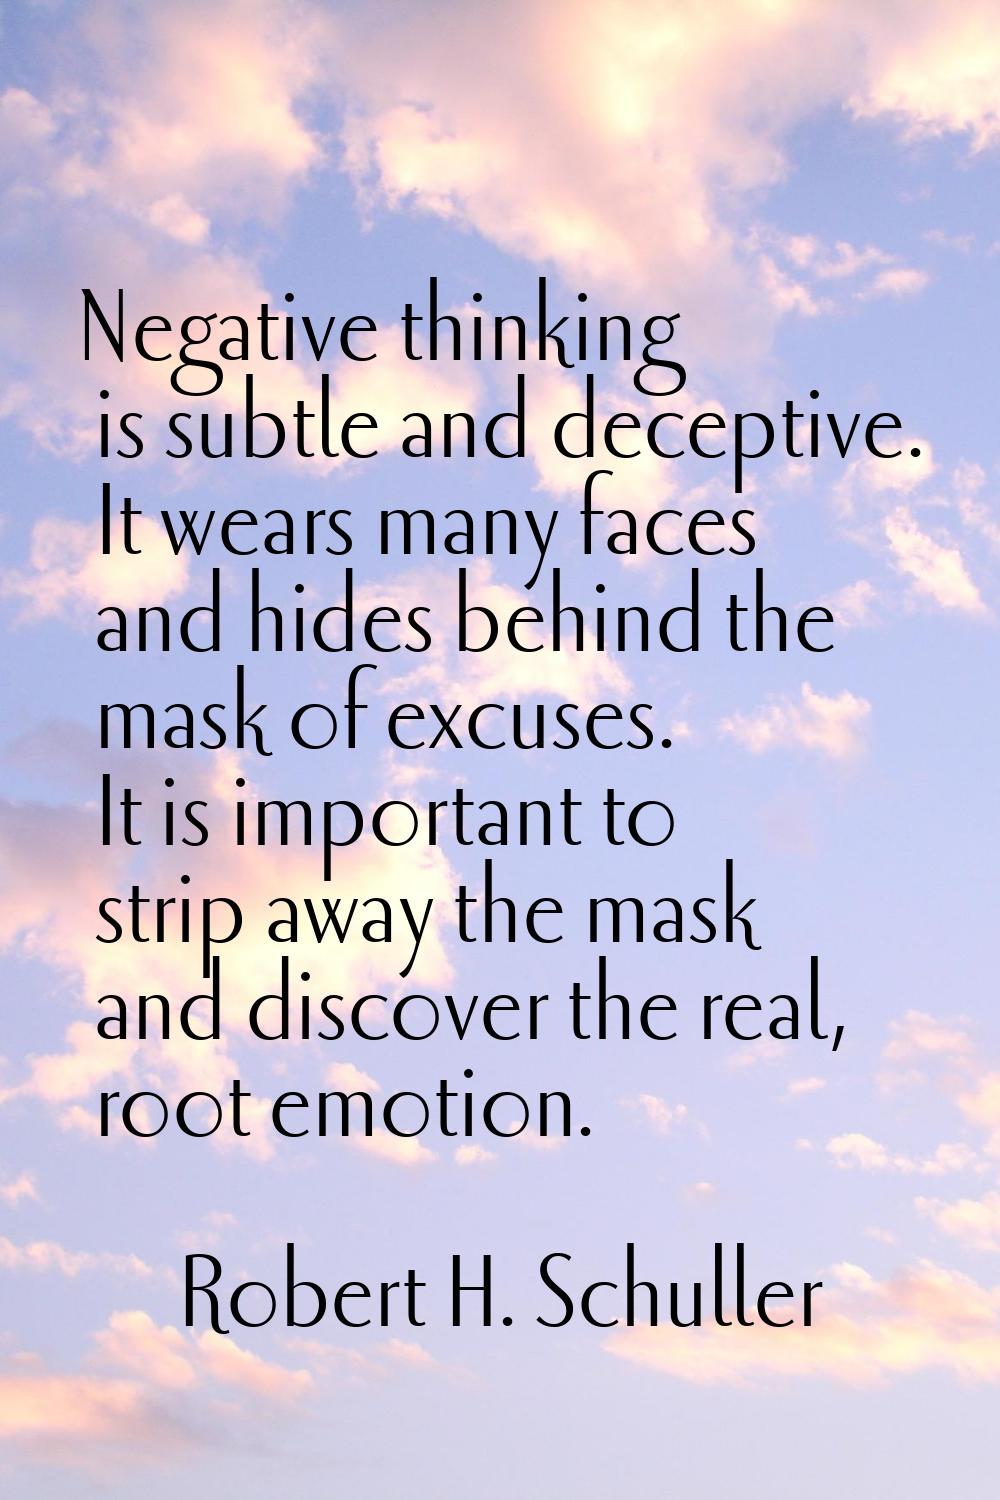 Negative thinking is subtle and deceptive. It wears many faces and hides behind the mask of excuses